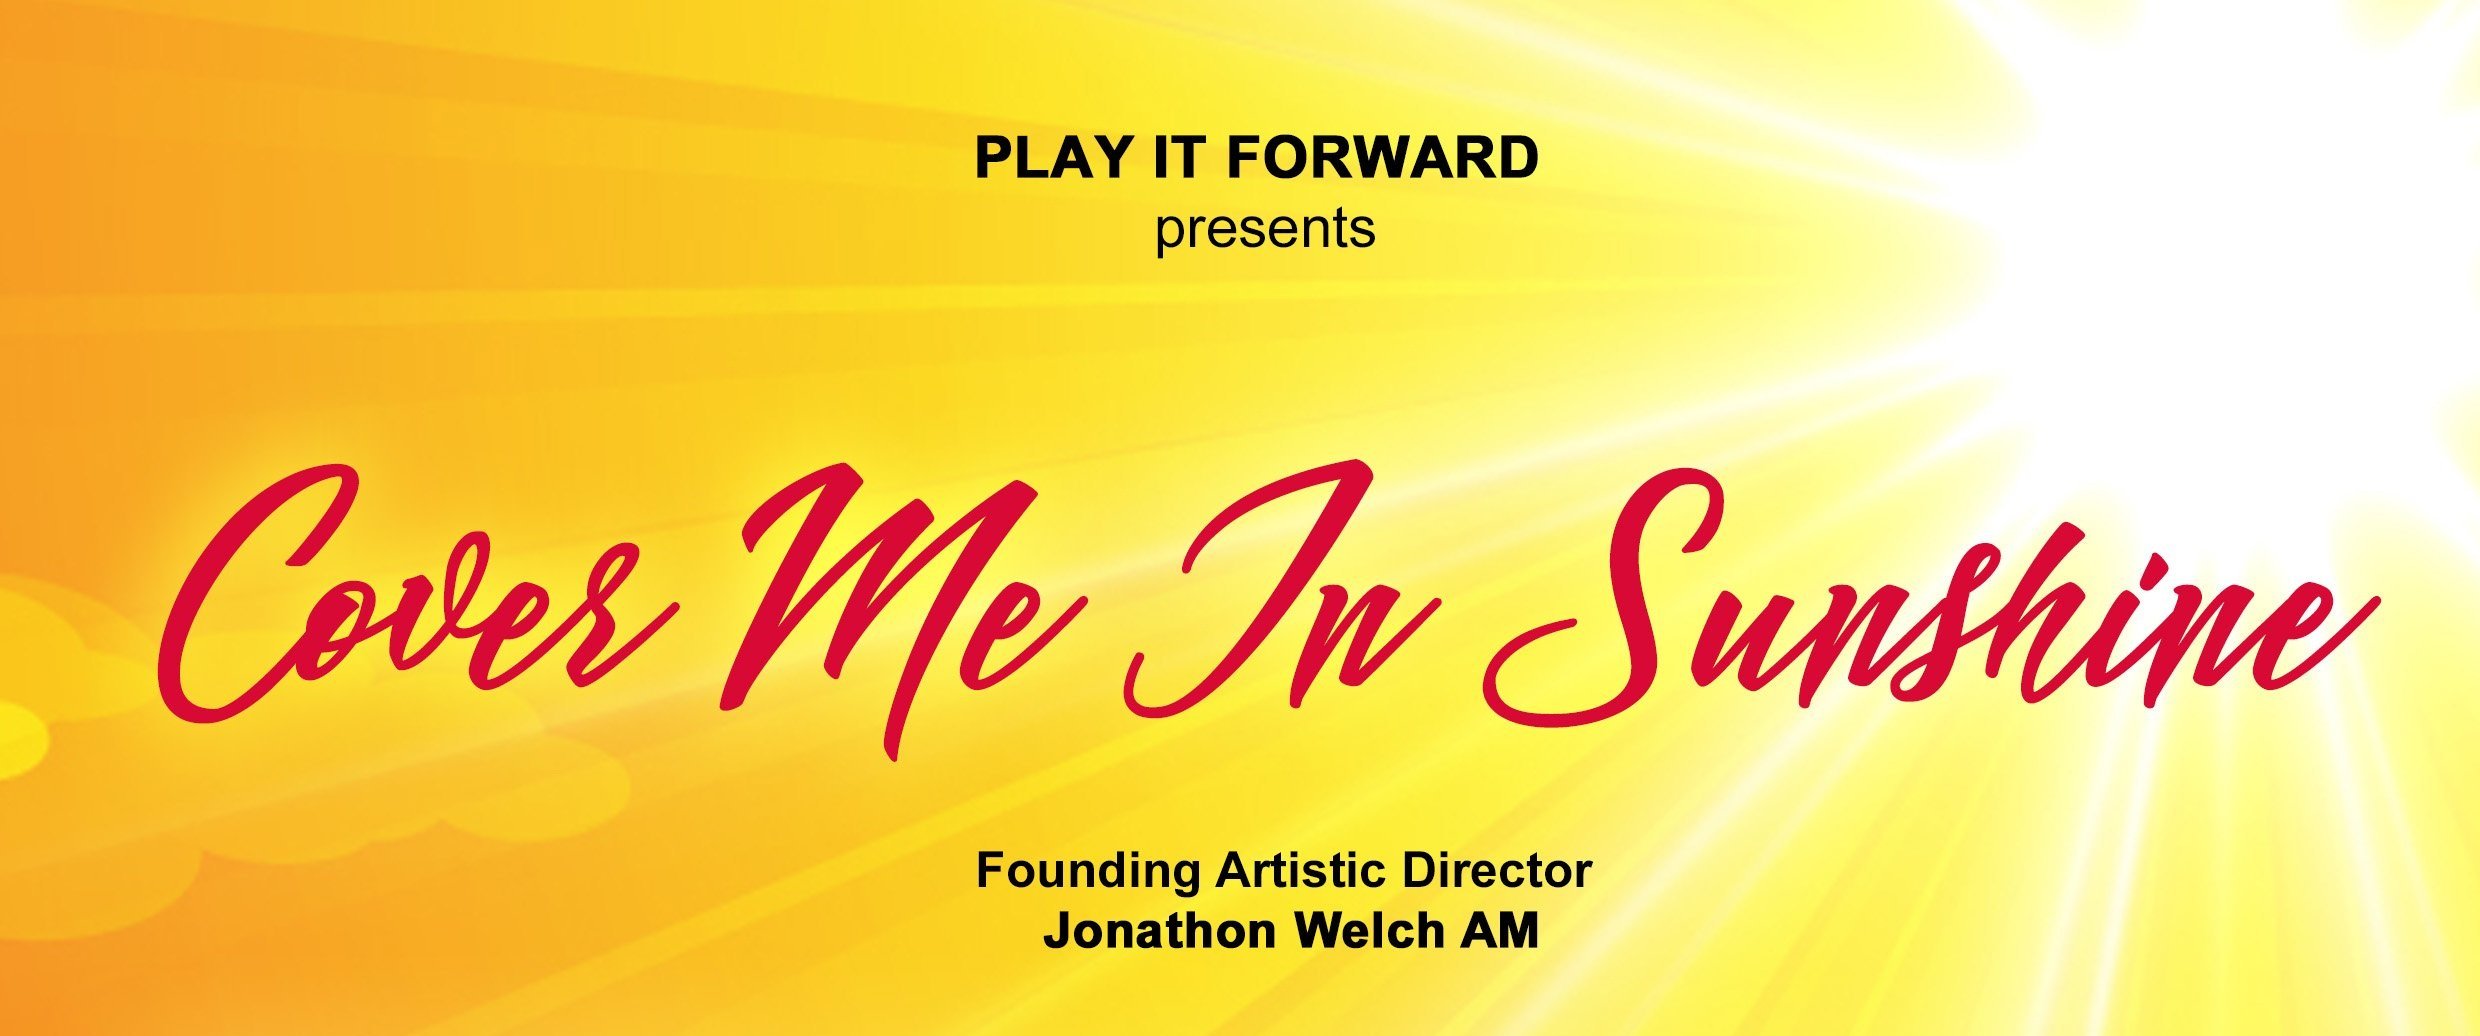 Play It Forward shines again with first concert in 1000 days